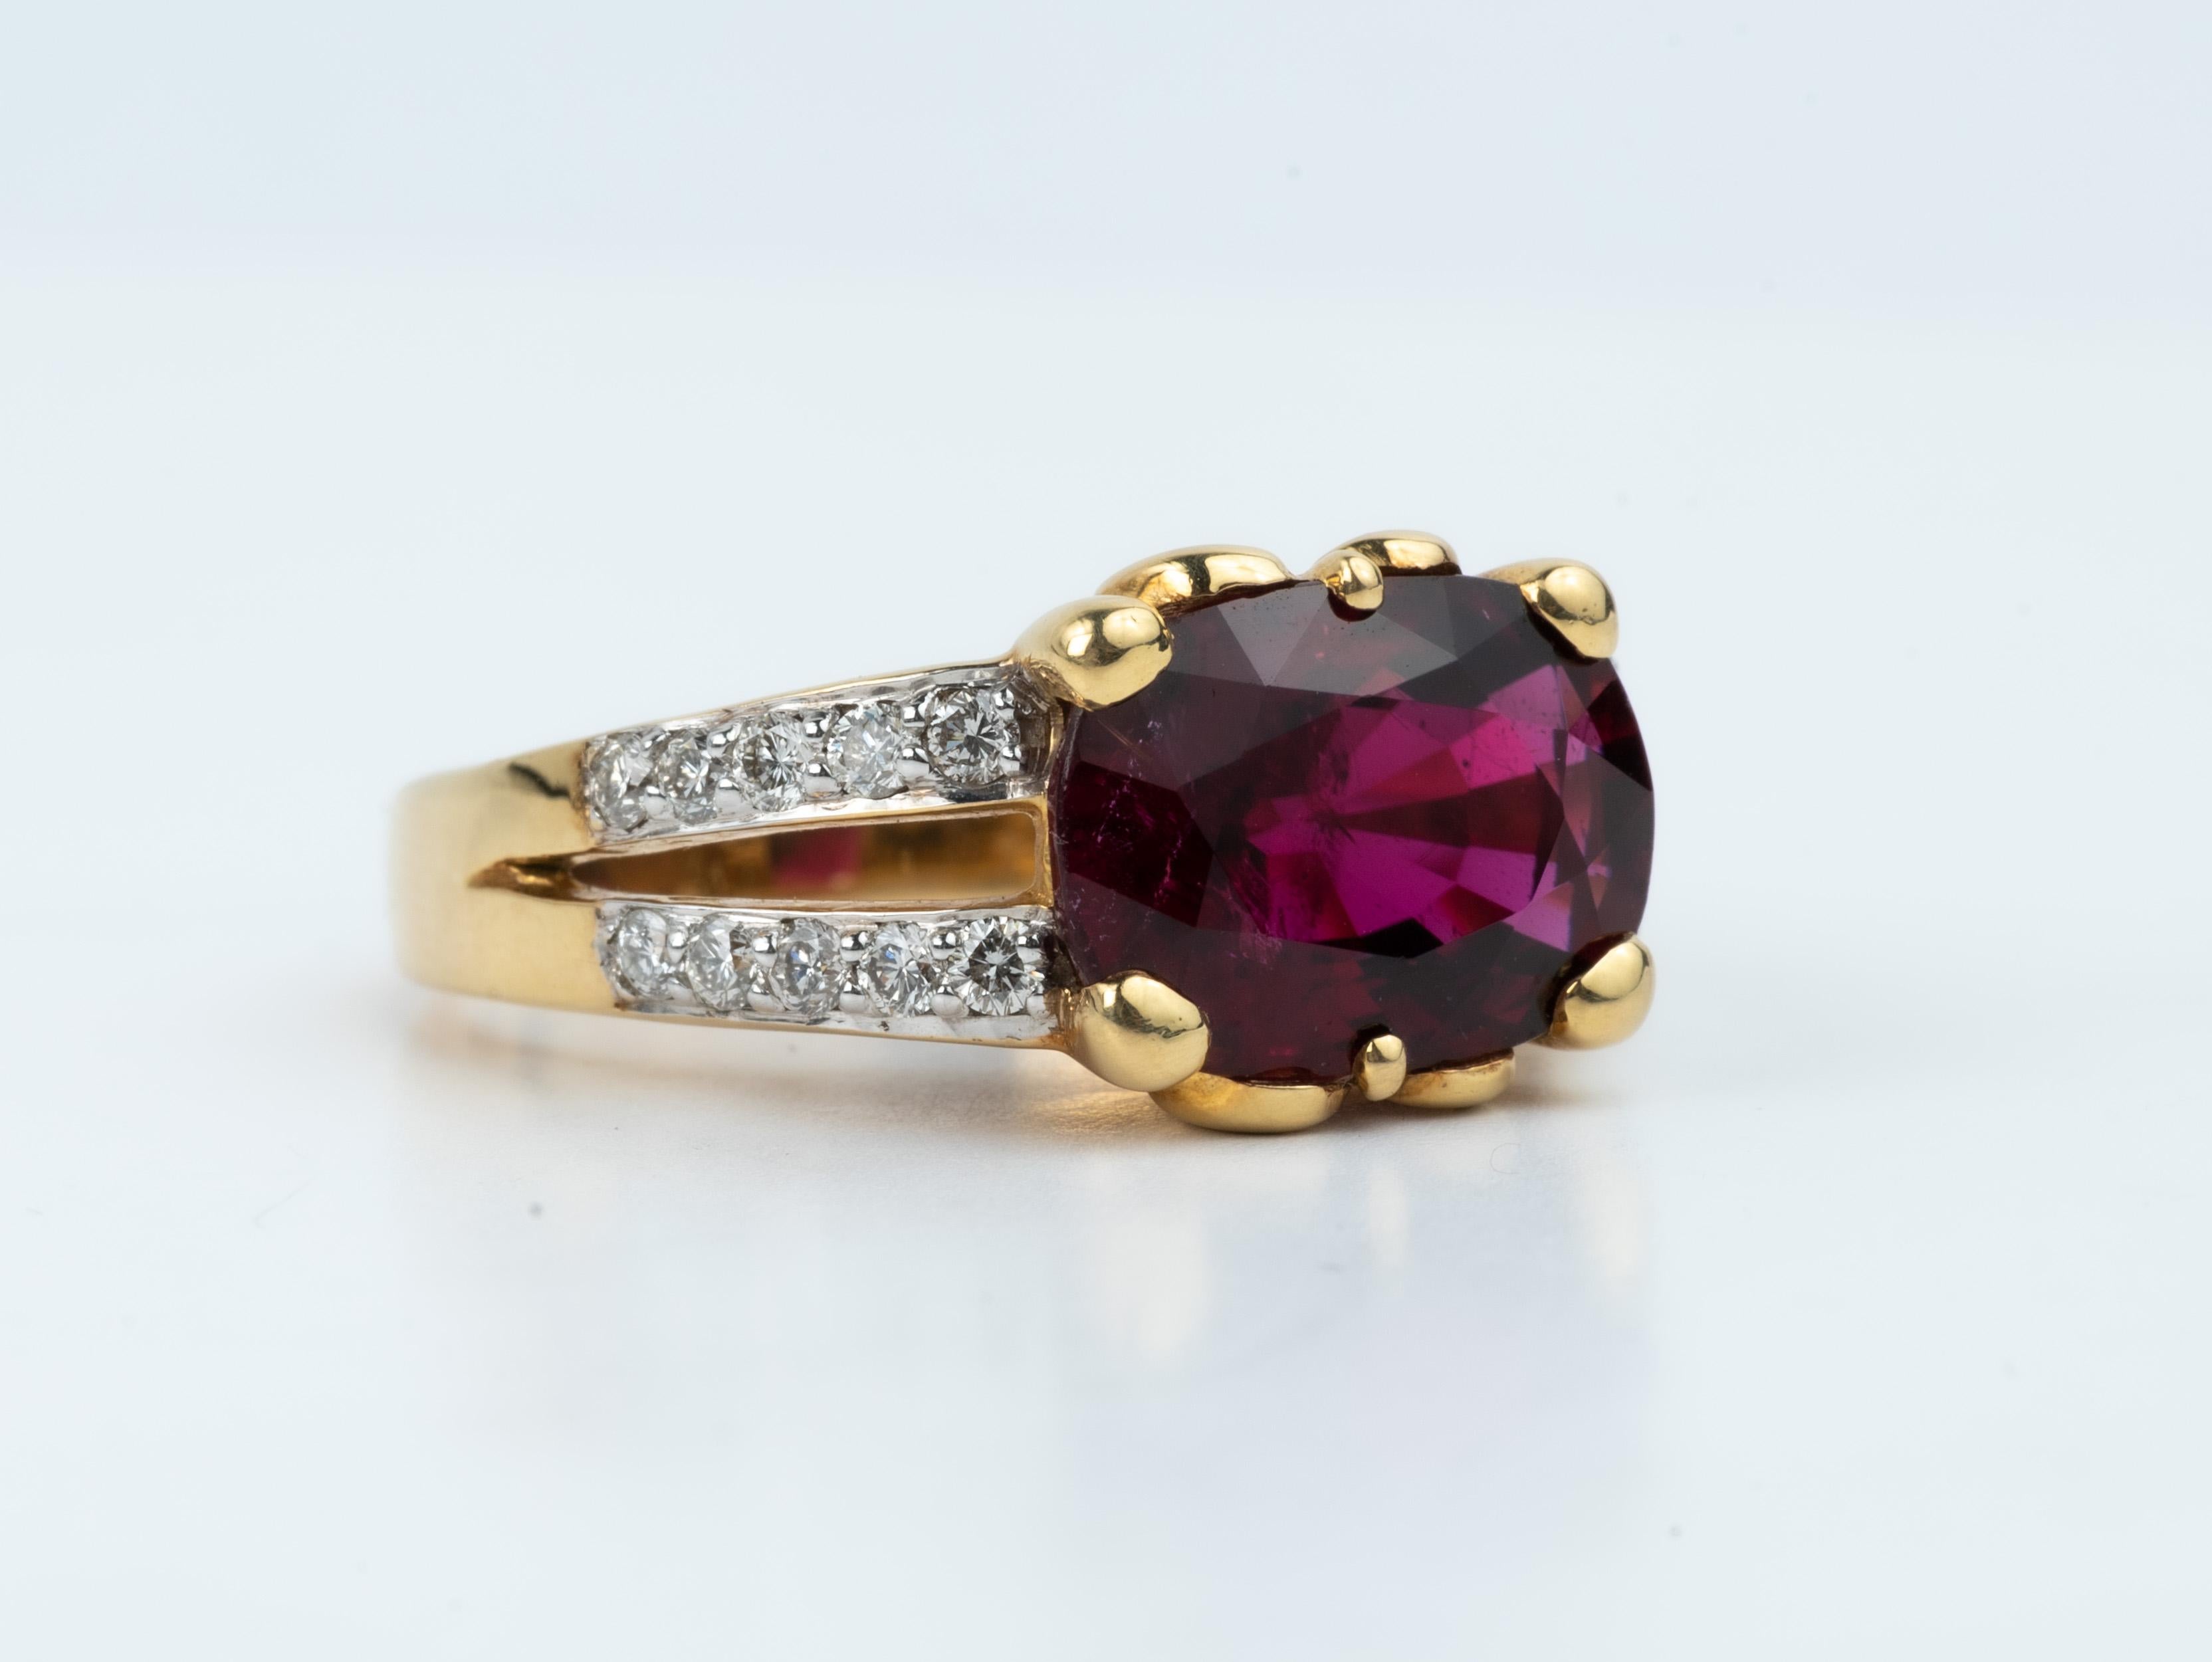 5 Carat Oval Cut Rubellite Tourmaline with 0.66 Diamonds Cocktail Ring 18k For Sale 1